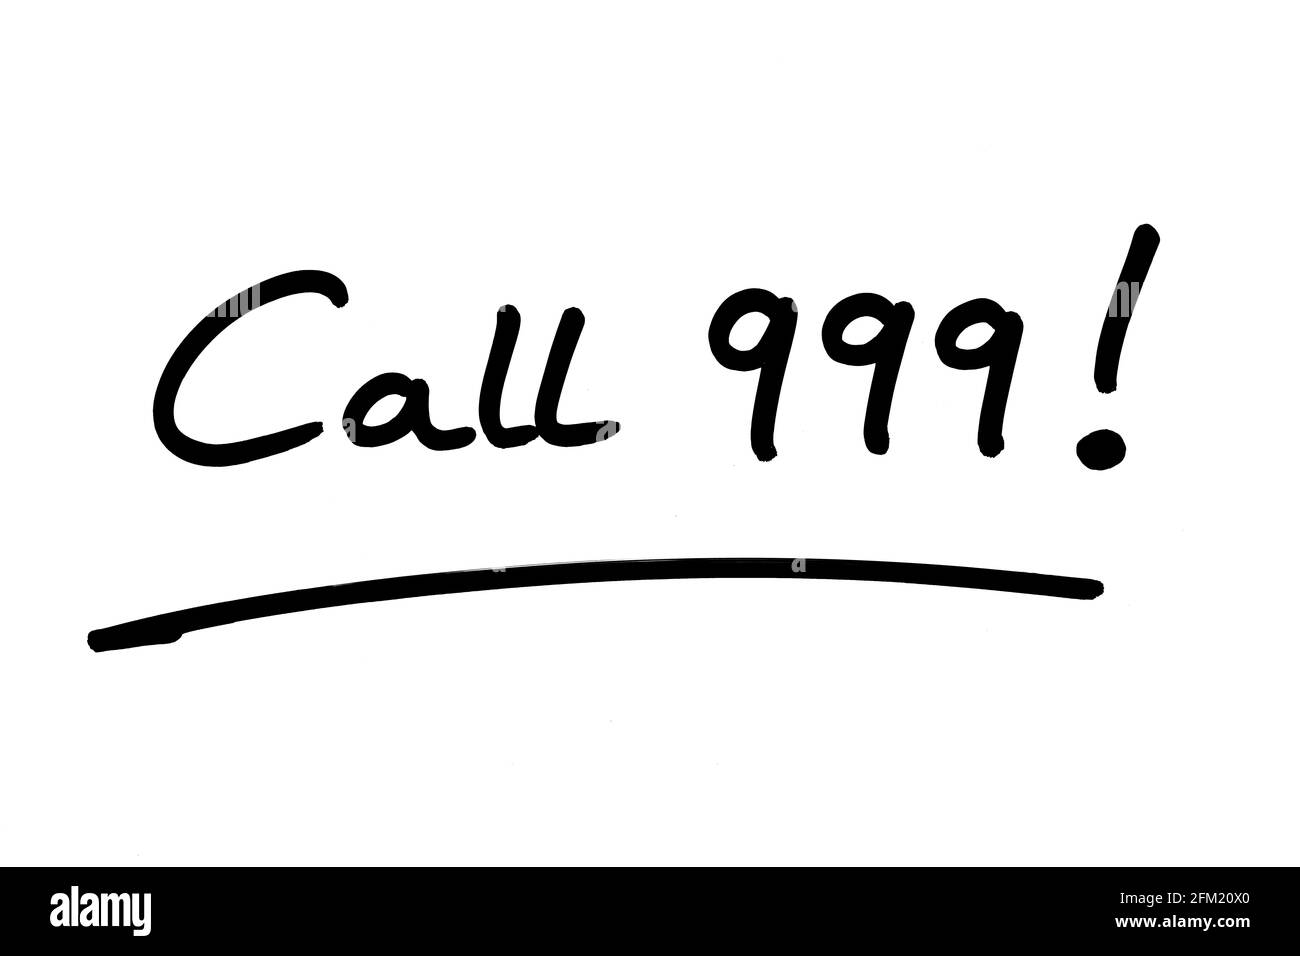 Call 999! handwritten on a white background. Stock Photo